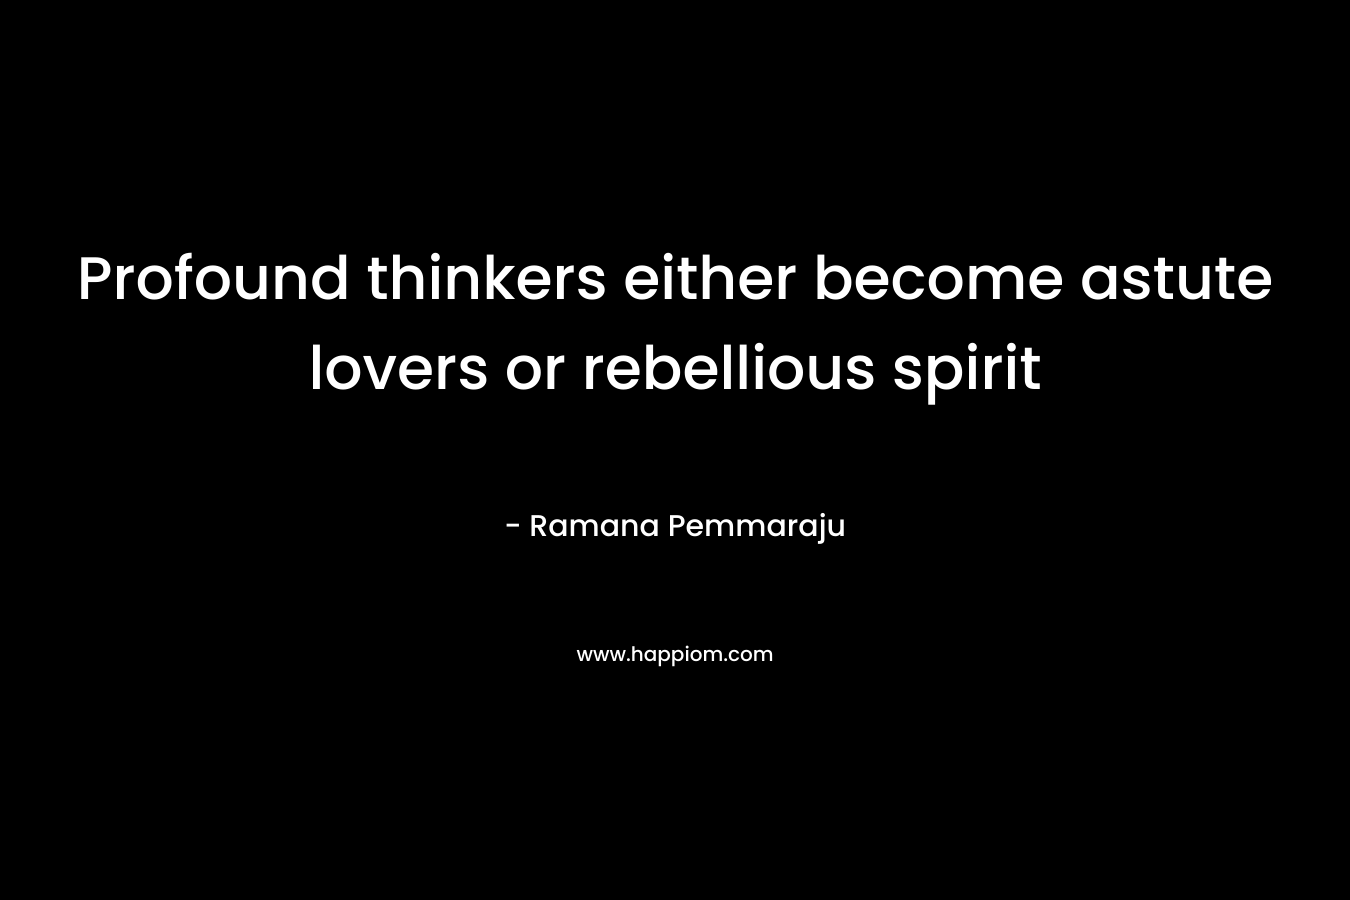 Profound thinkers either become astute lovers or rebellious spirit – Ramana Pemmaraju